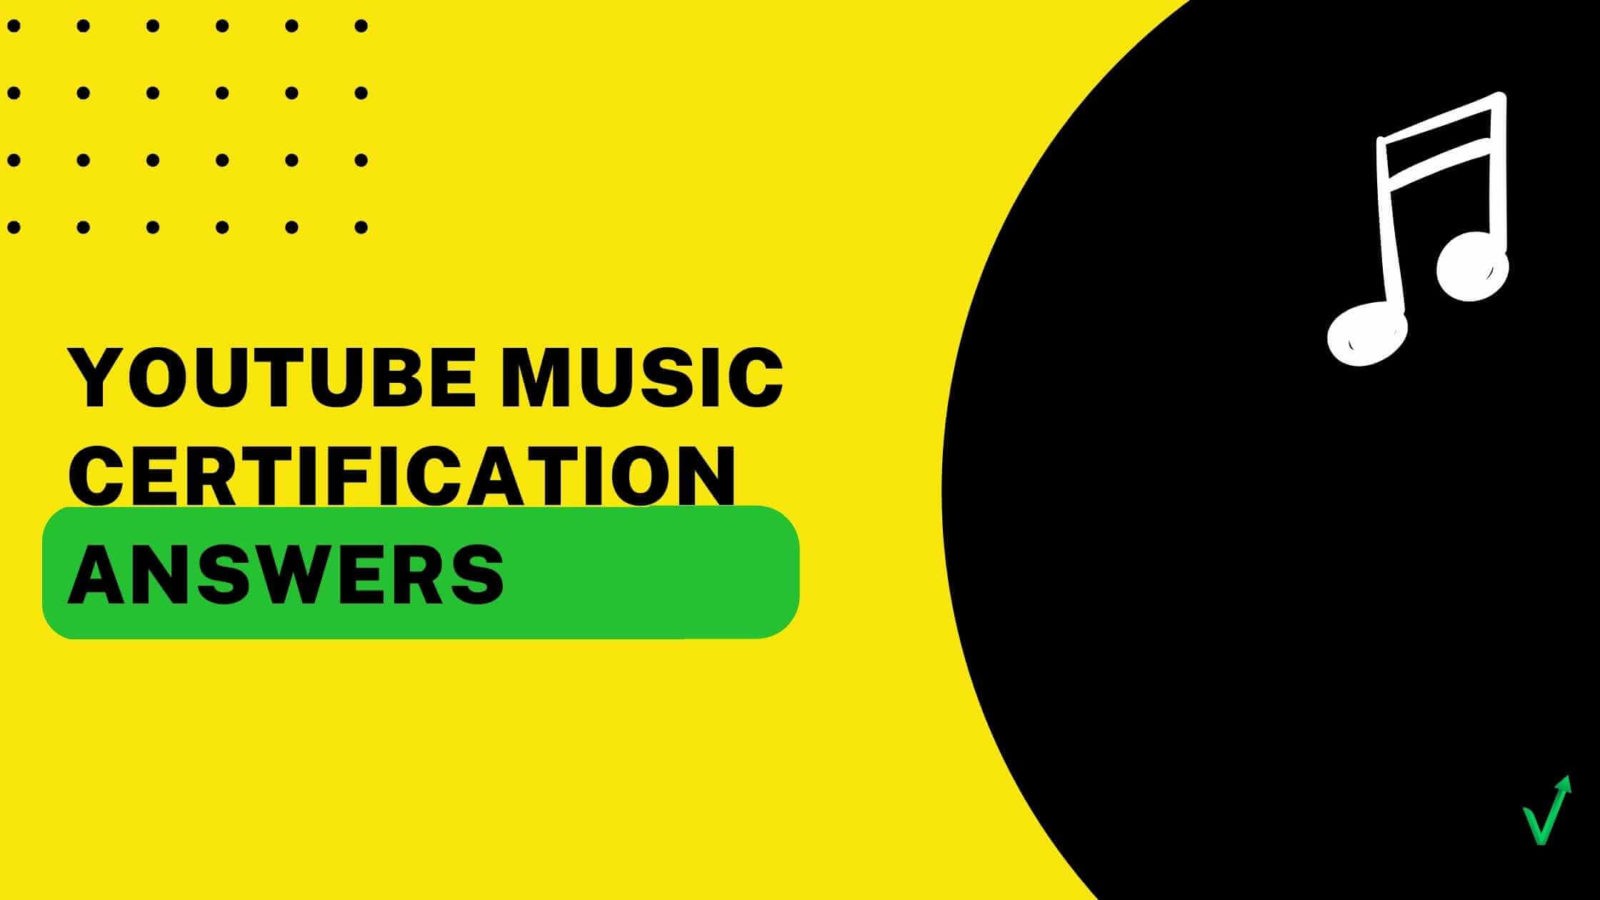 YouTube music certification answers 2022